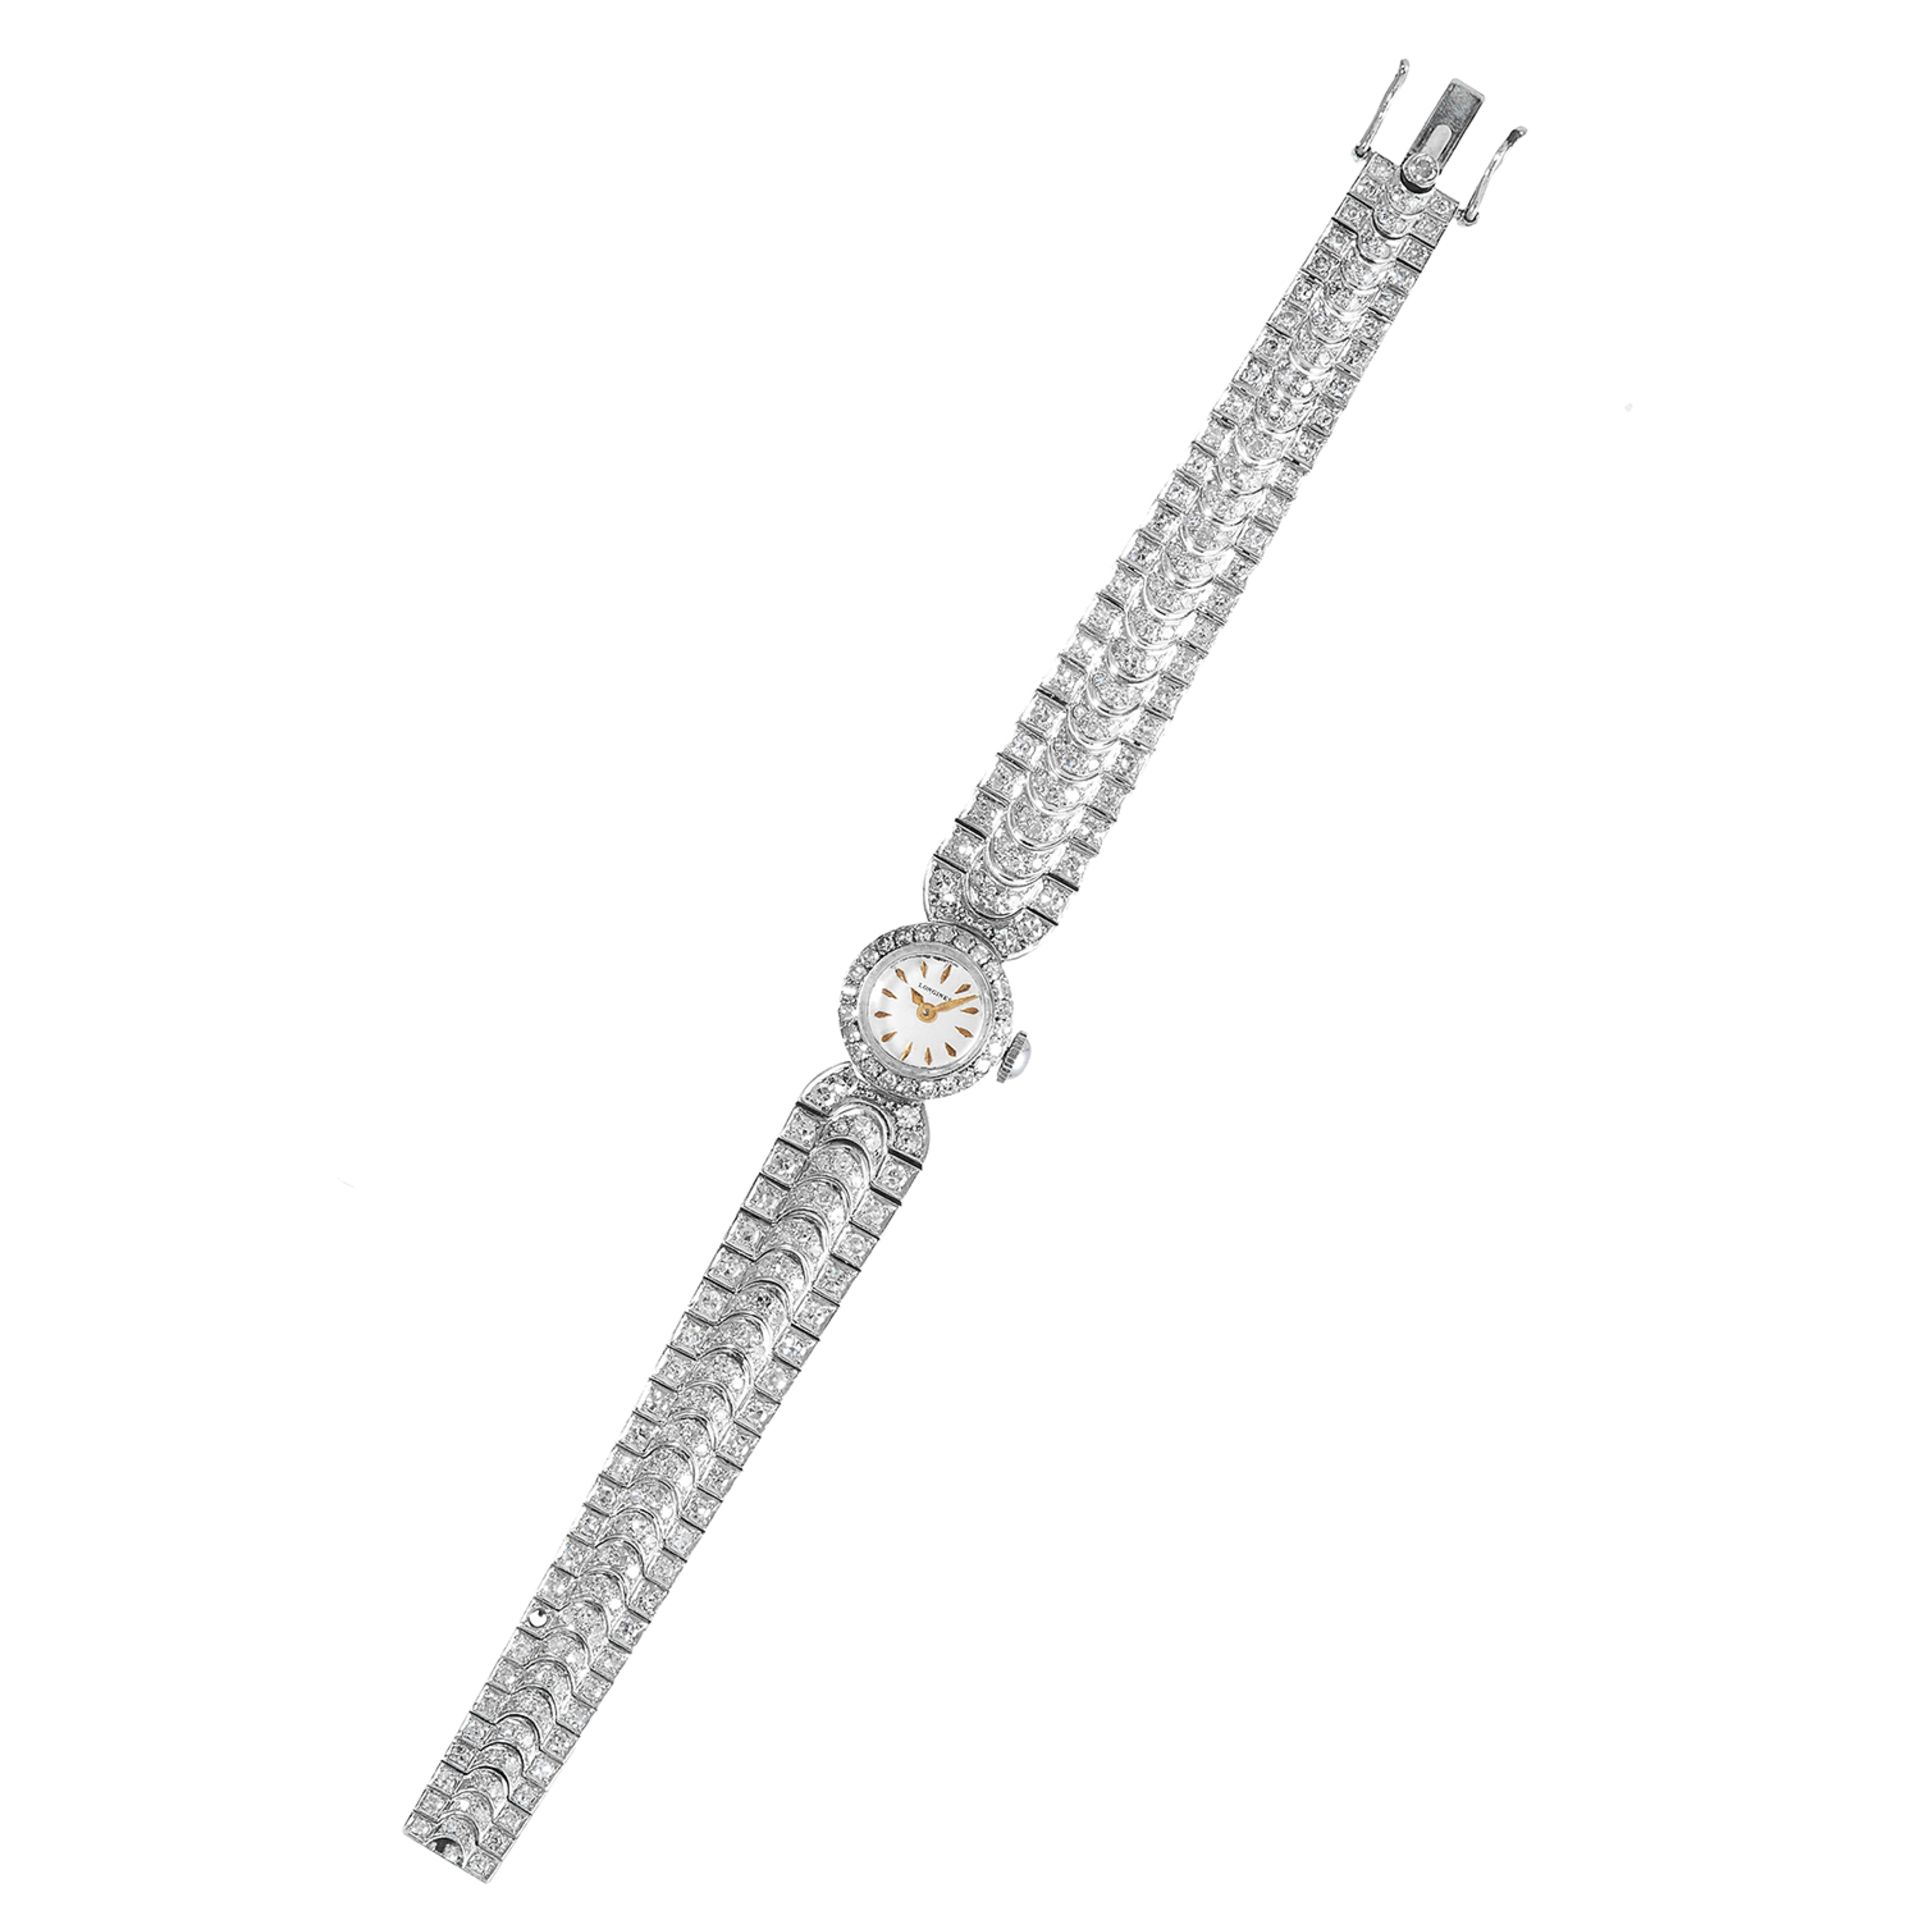 A DIAMOND JEWELLED WATCH, LONGINES in platinum, the strap jewelled with round cut diamonds with